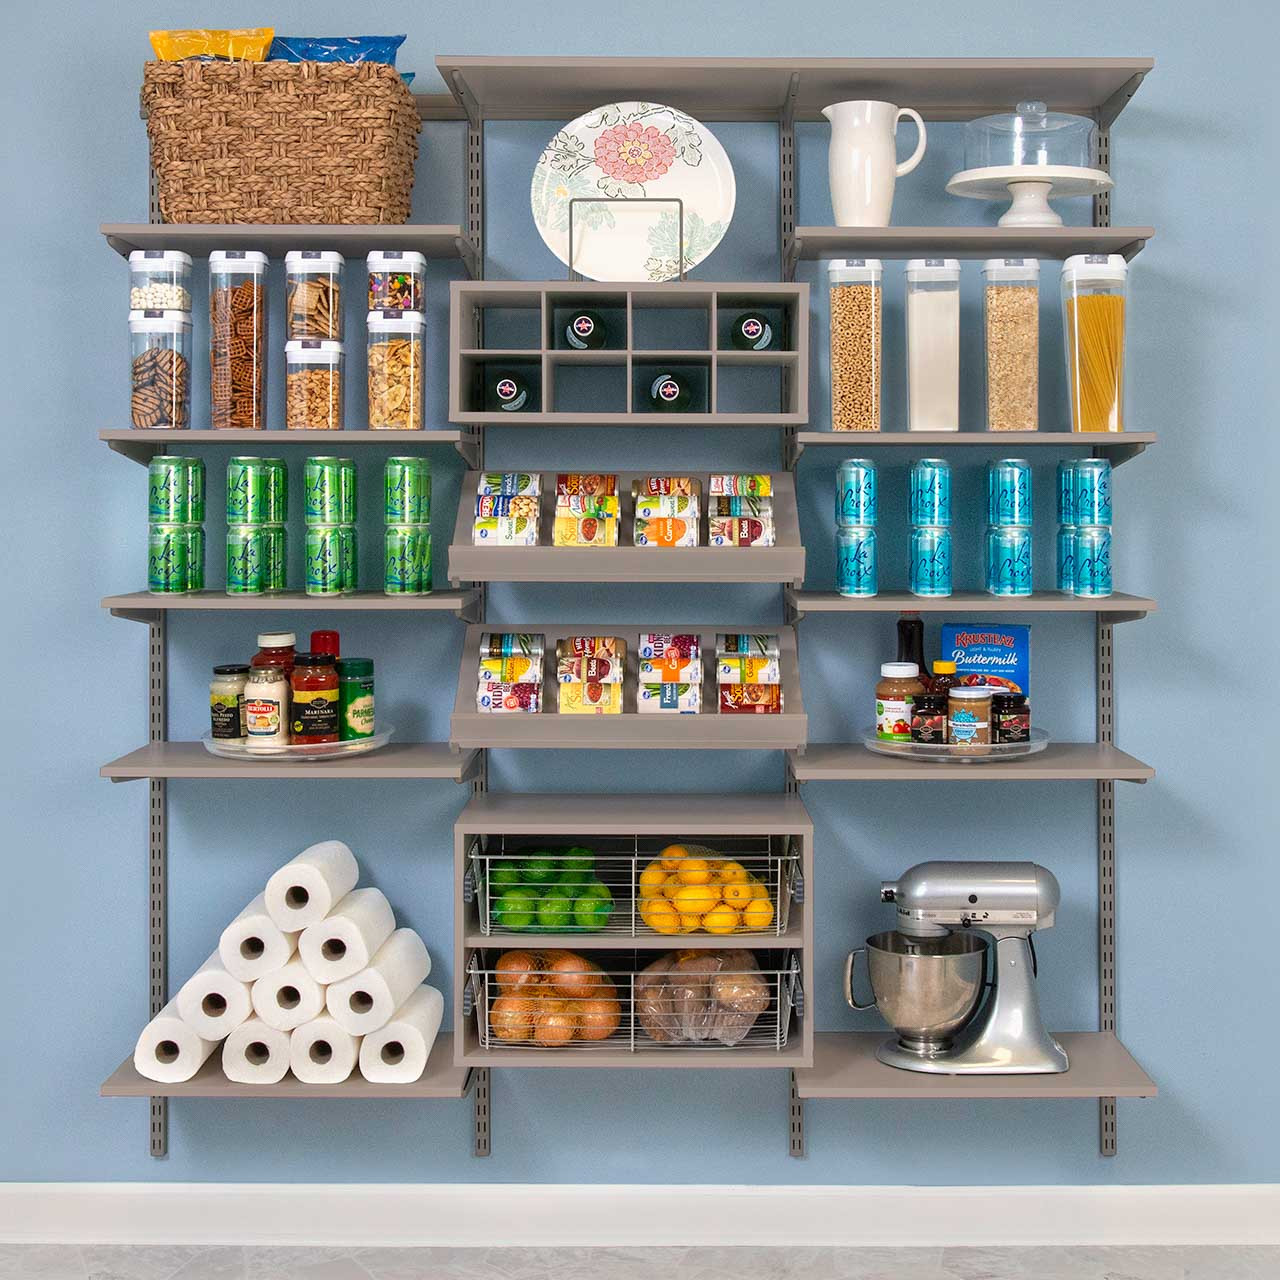 Installed Pantry Organization System HDINSTPOS - The Home Depot